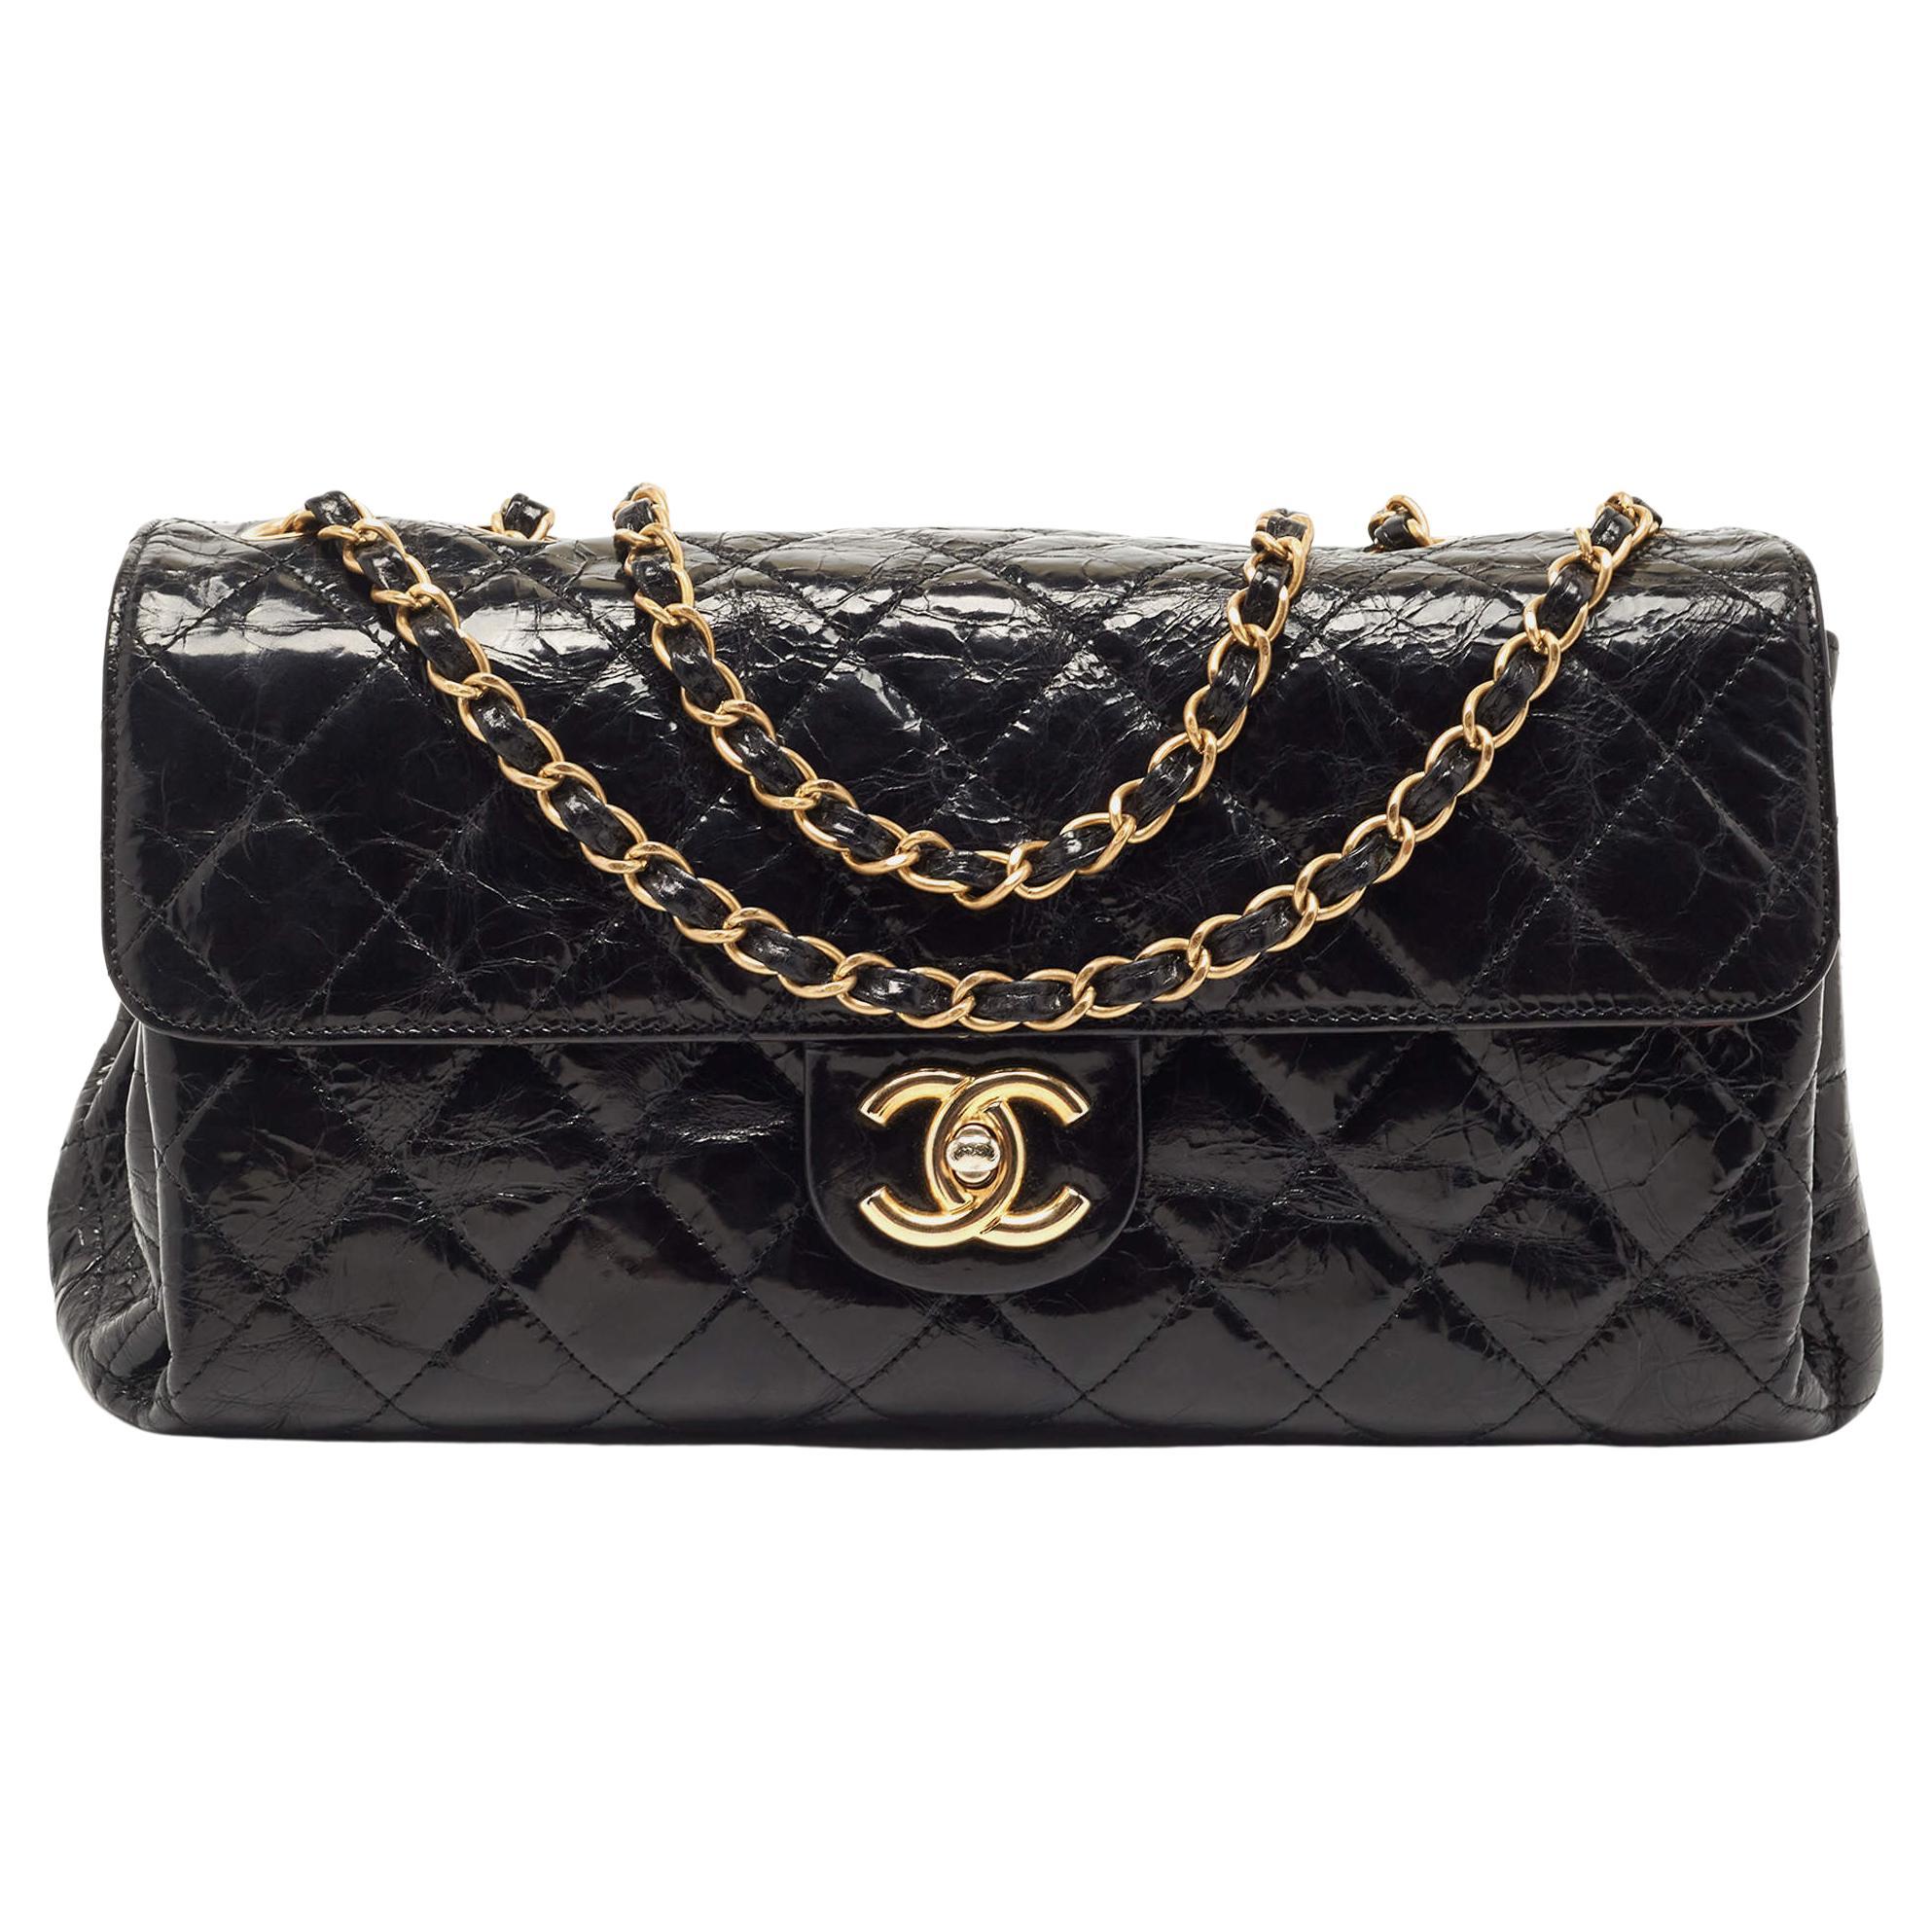 Chanel Black Quilted Leather CC Flap Bag For Sale